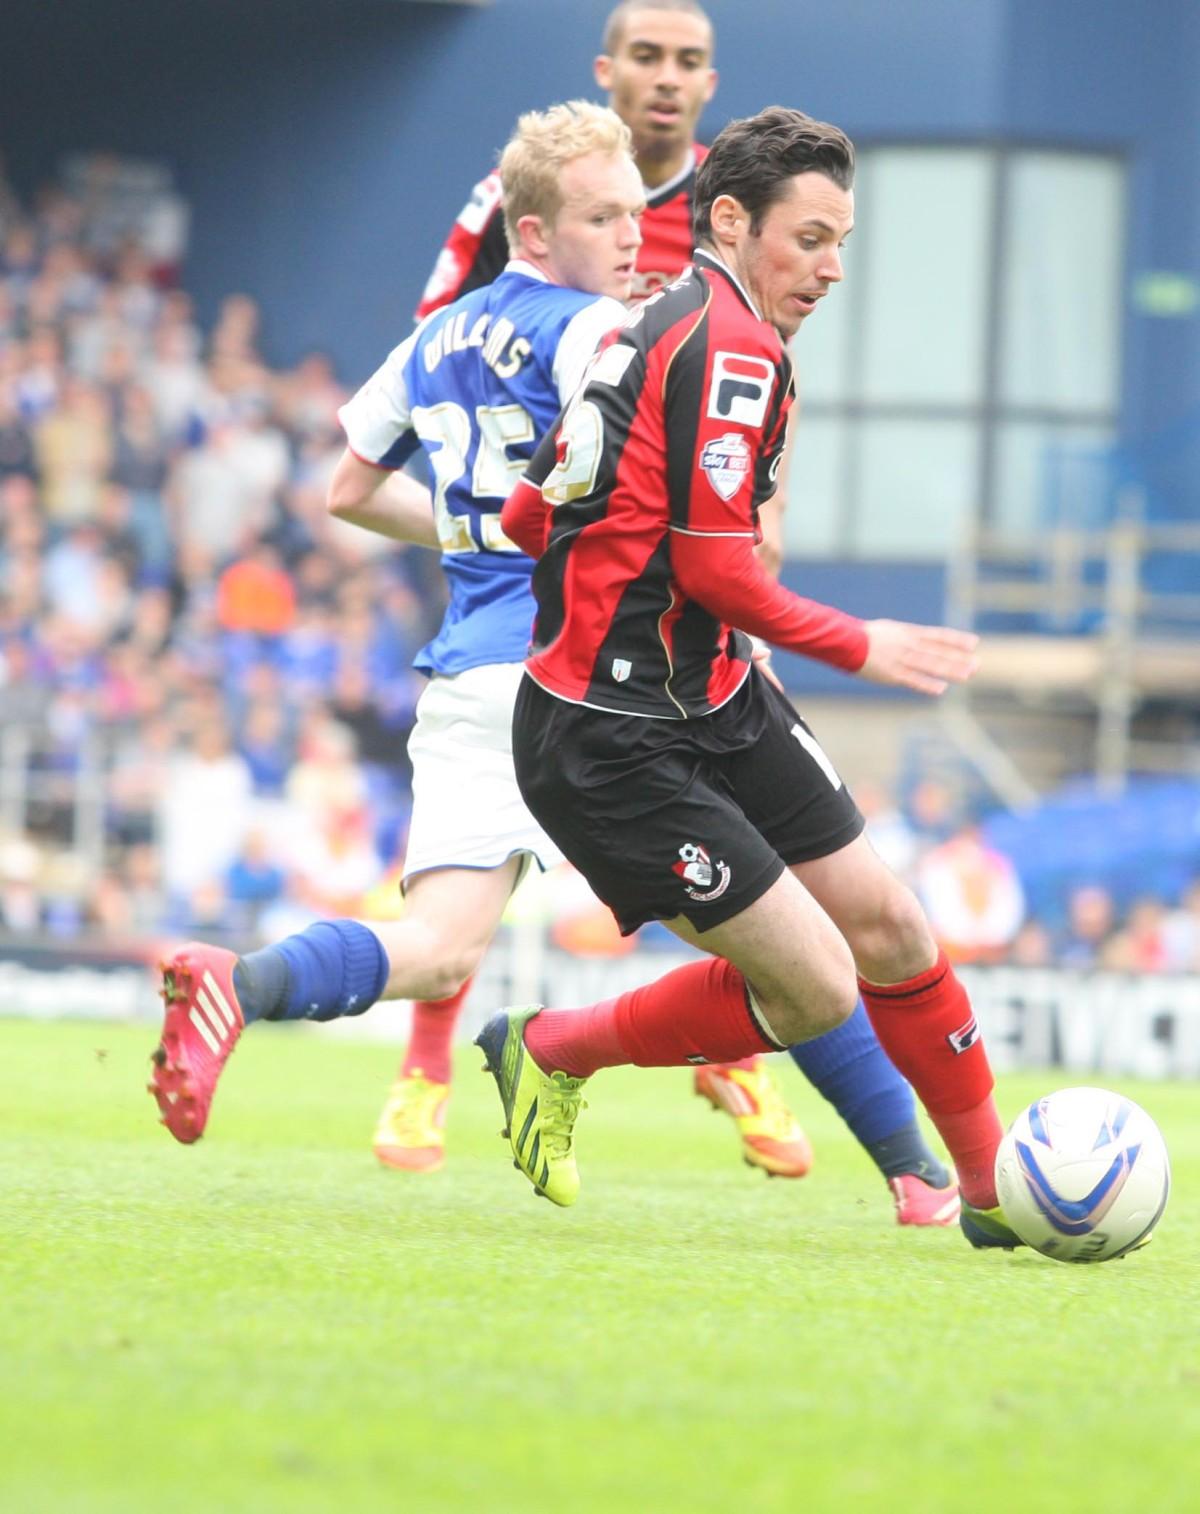 Ipswich Town v AFC Bournemouth